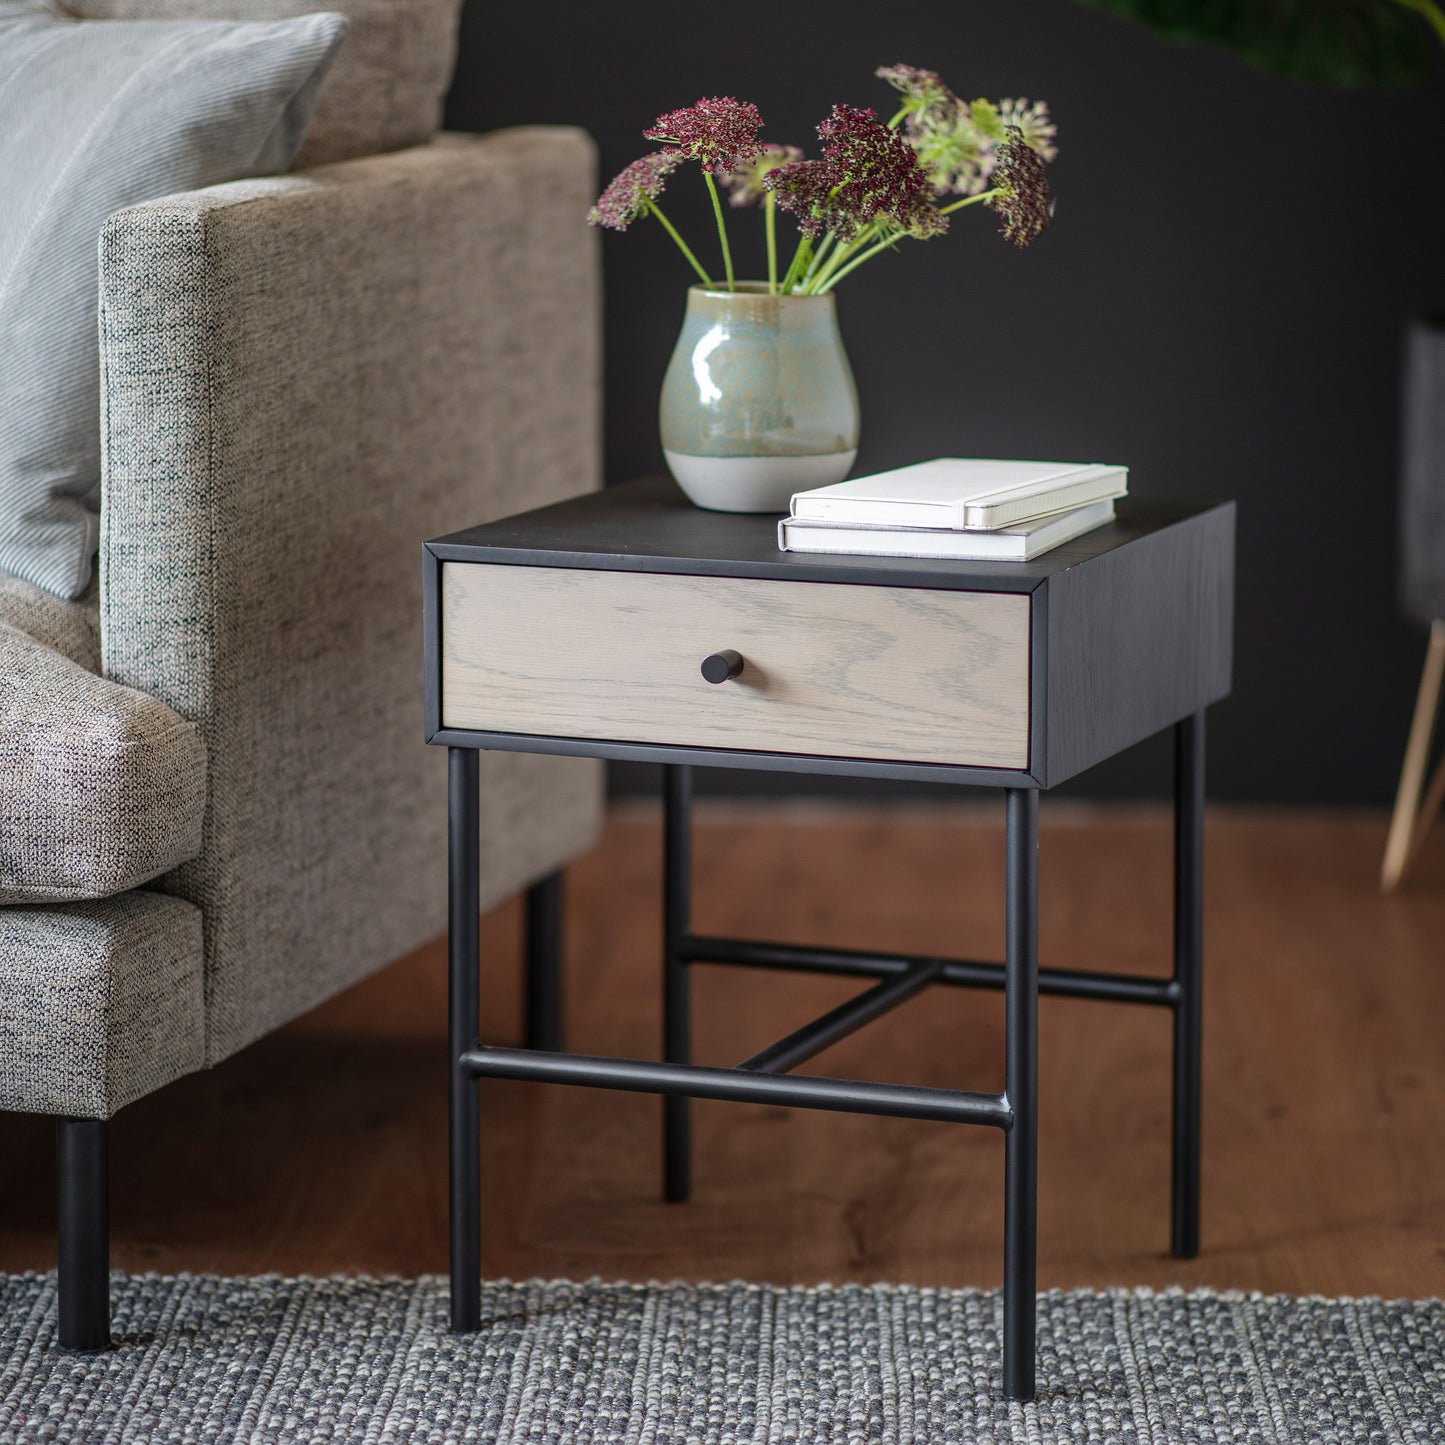 A Prawle 1 Drawer Bedside Table from Kikiathome.co.uk with a drawer and a vase, perfect for home furniture and interior decor.